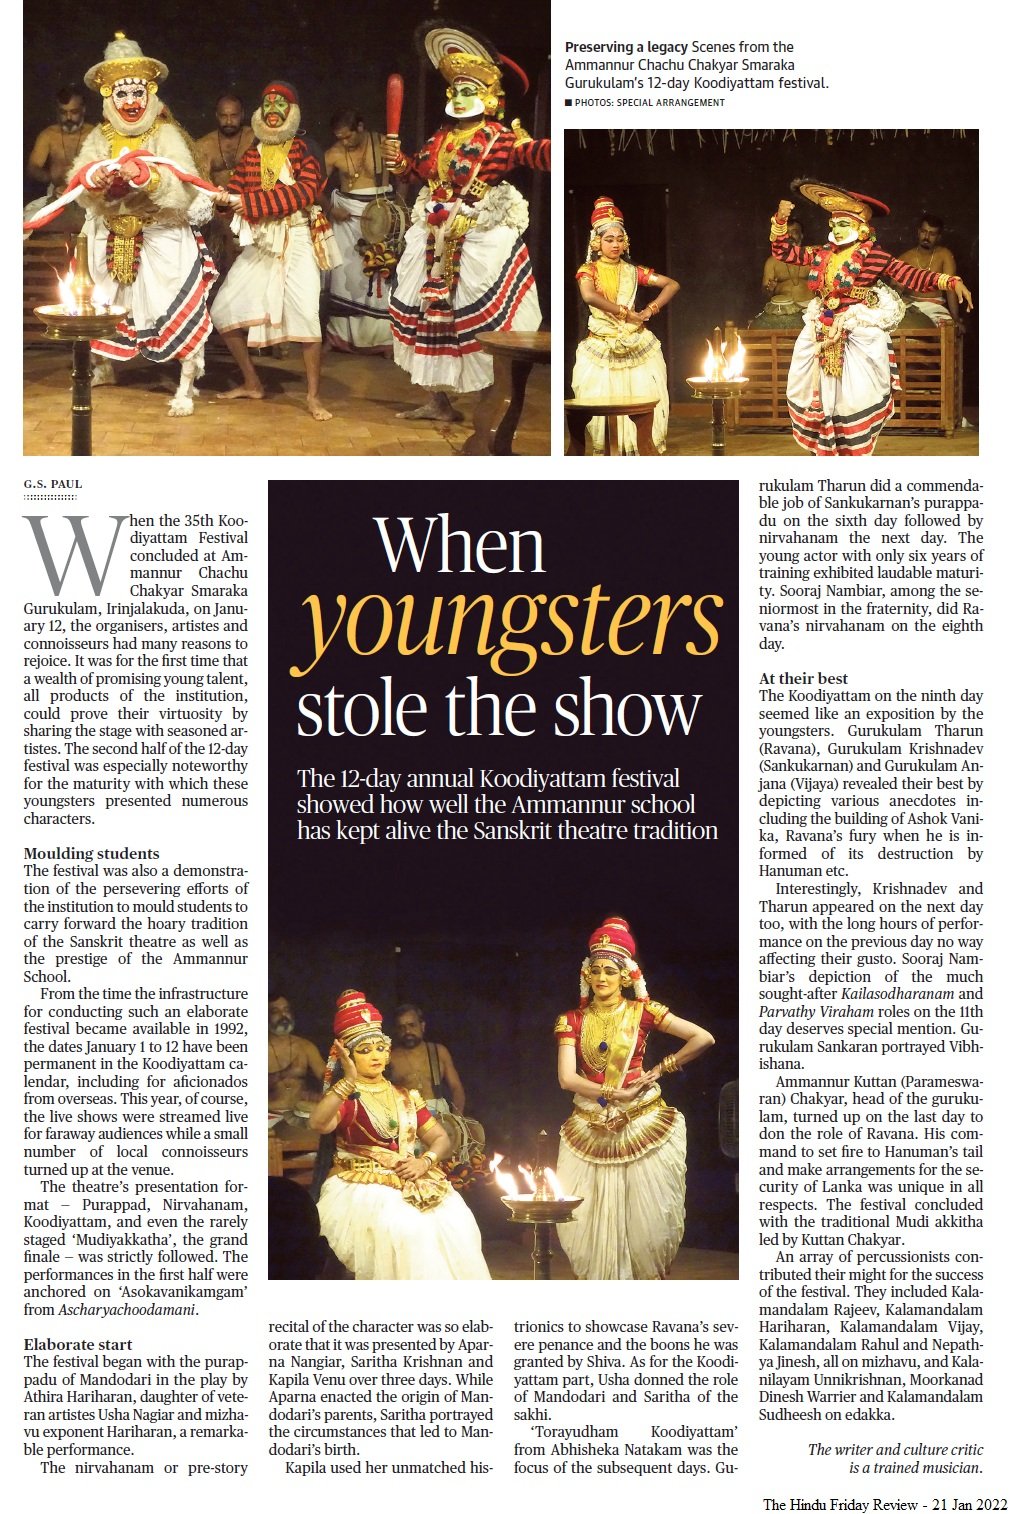 When youngsters stole the show - G S Paul